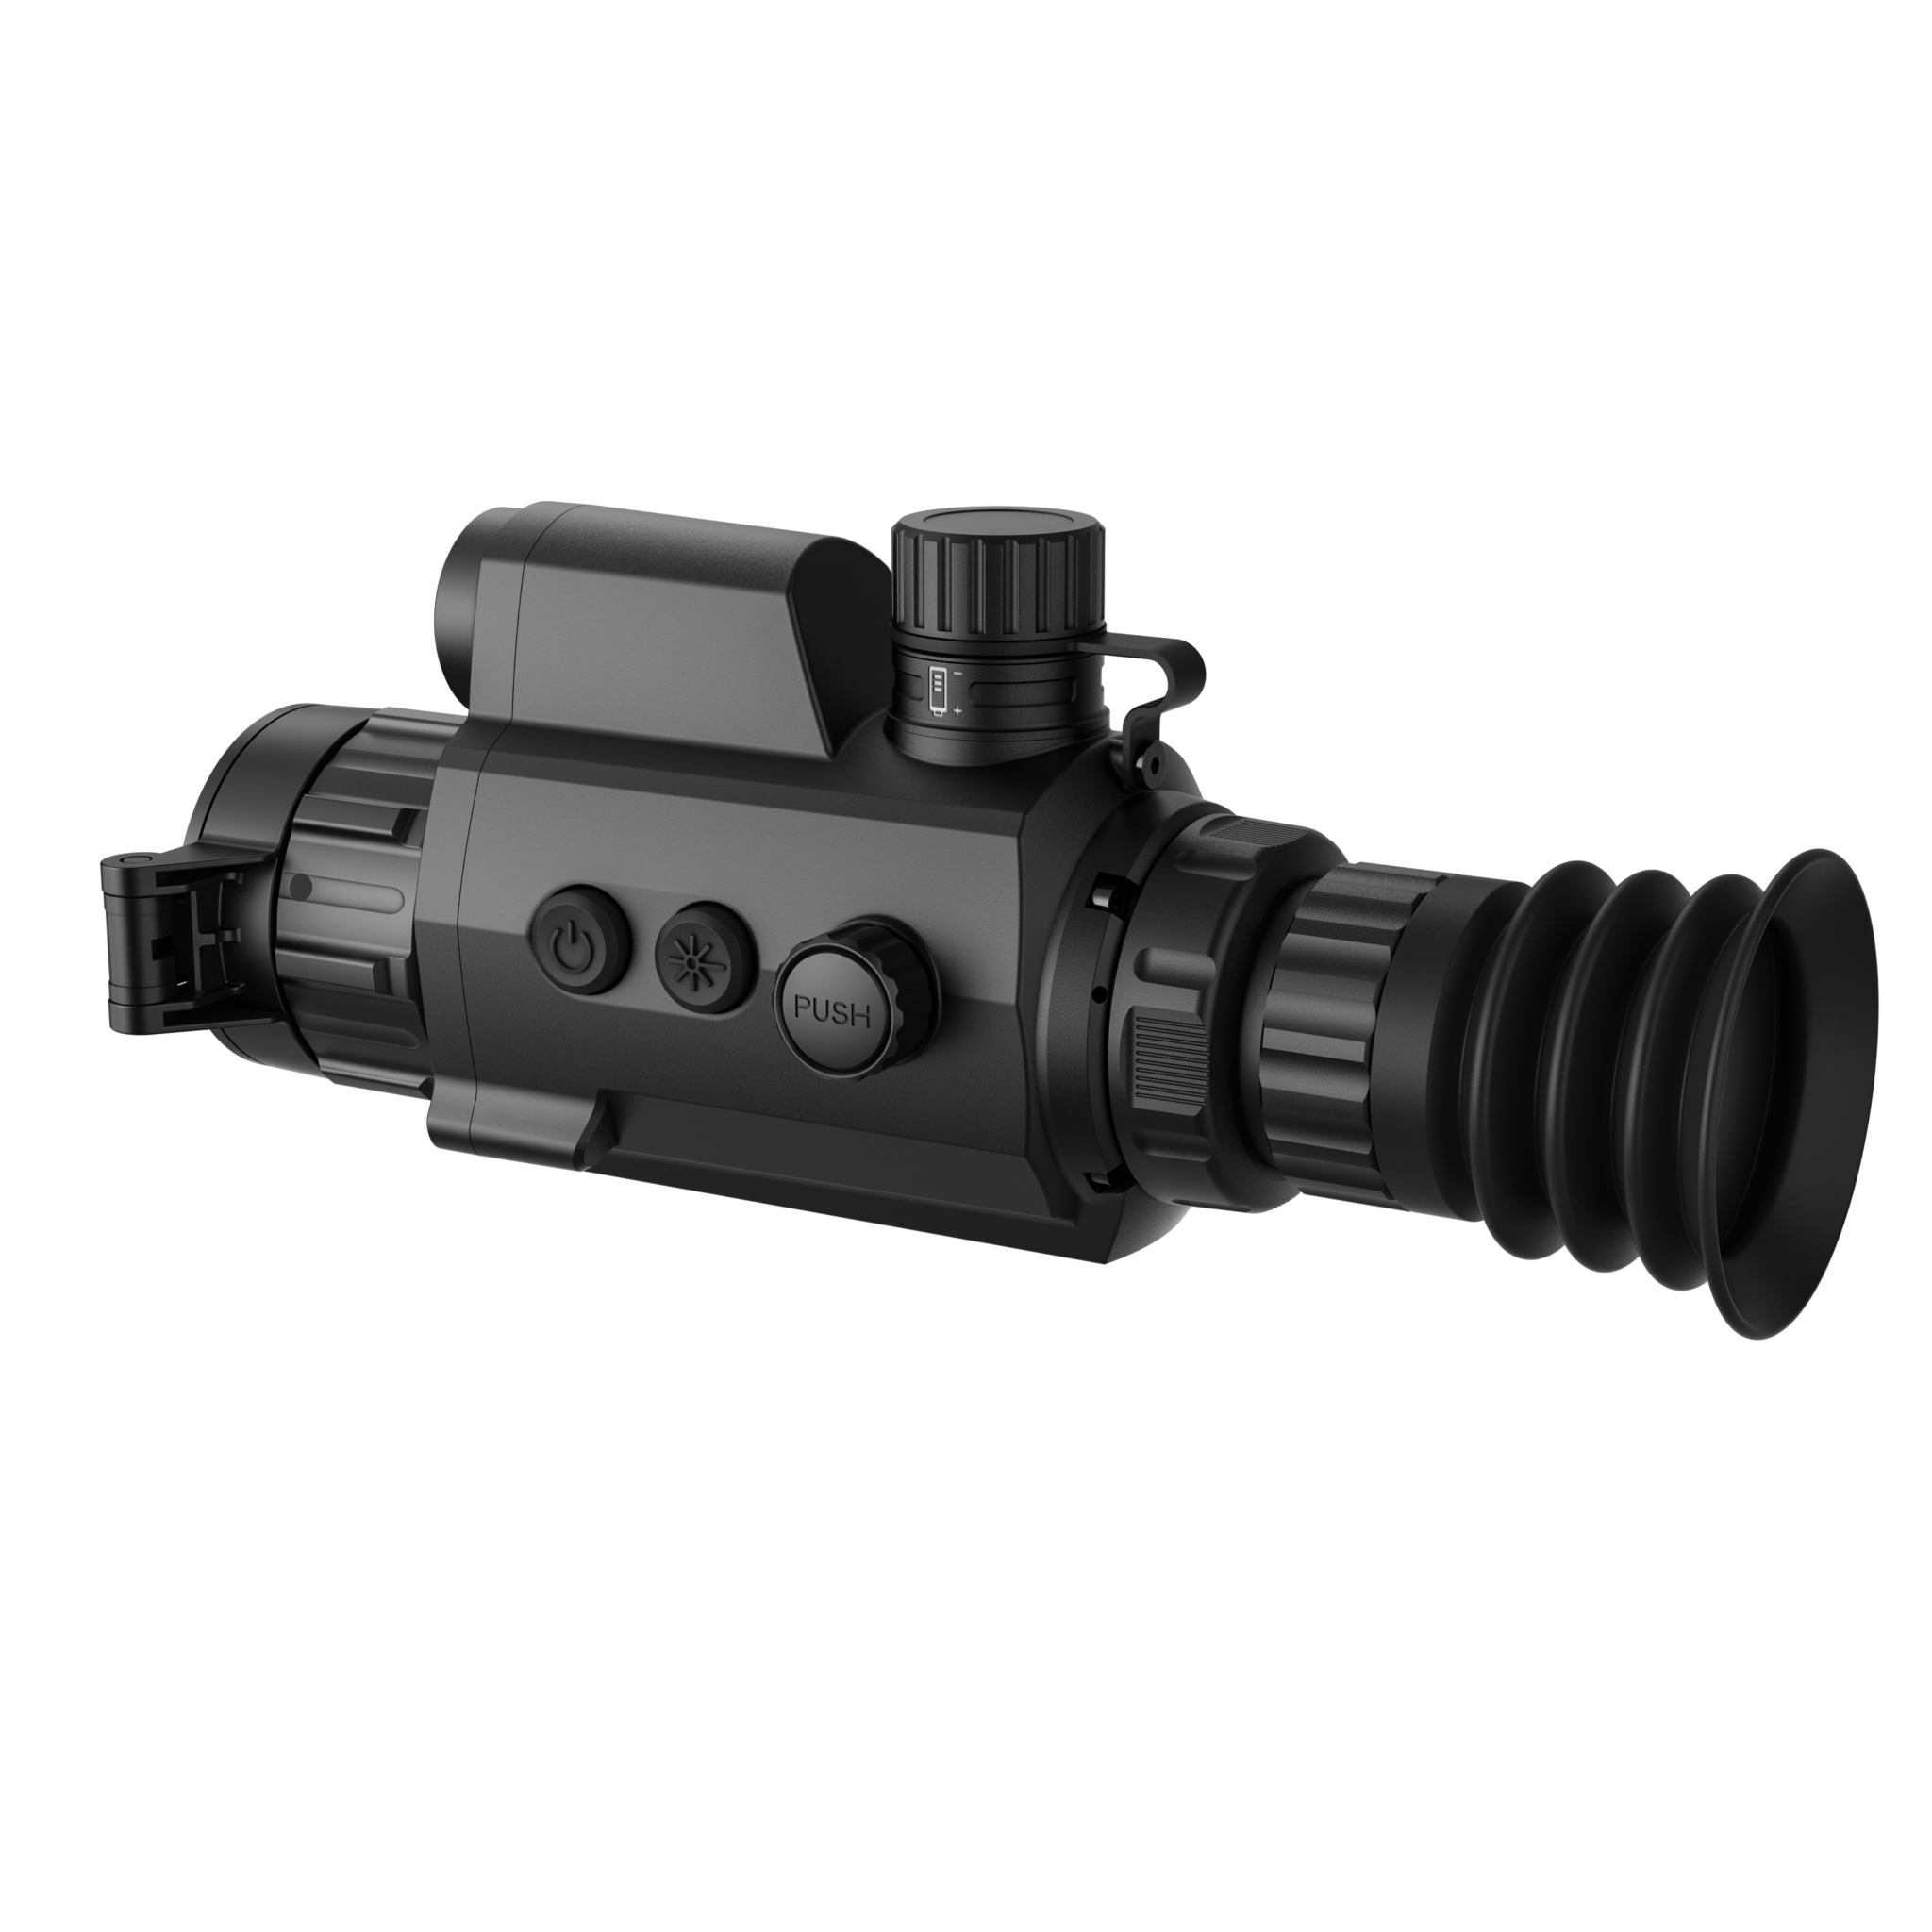 HIKMICRO Panther 2.0 PH35 Thermal Scope